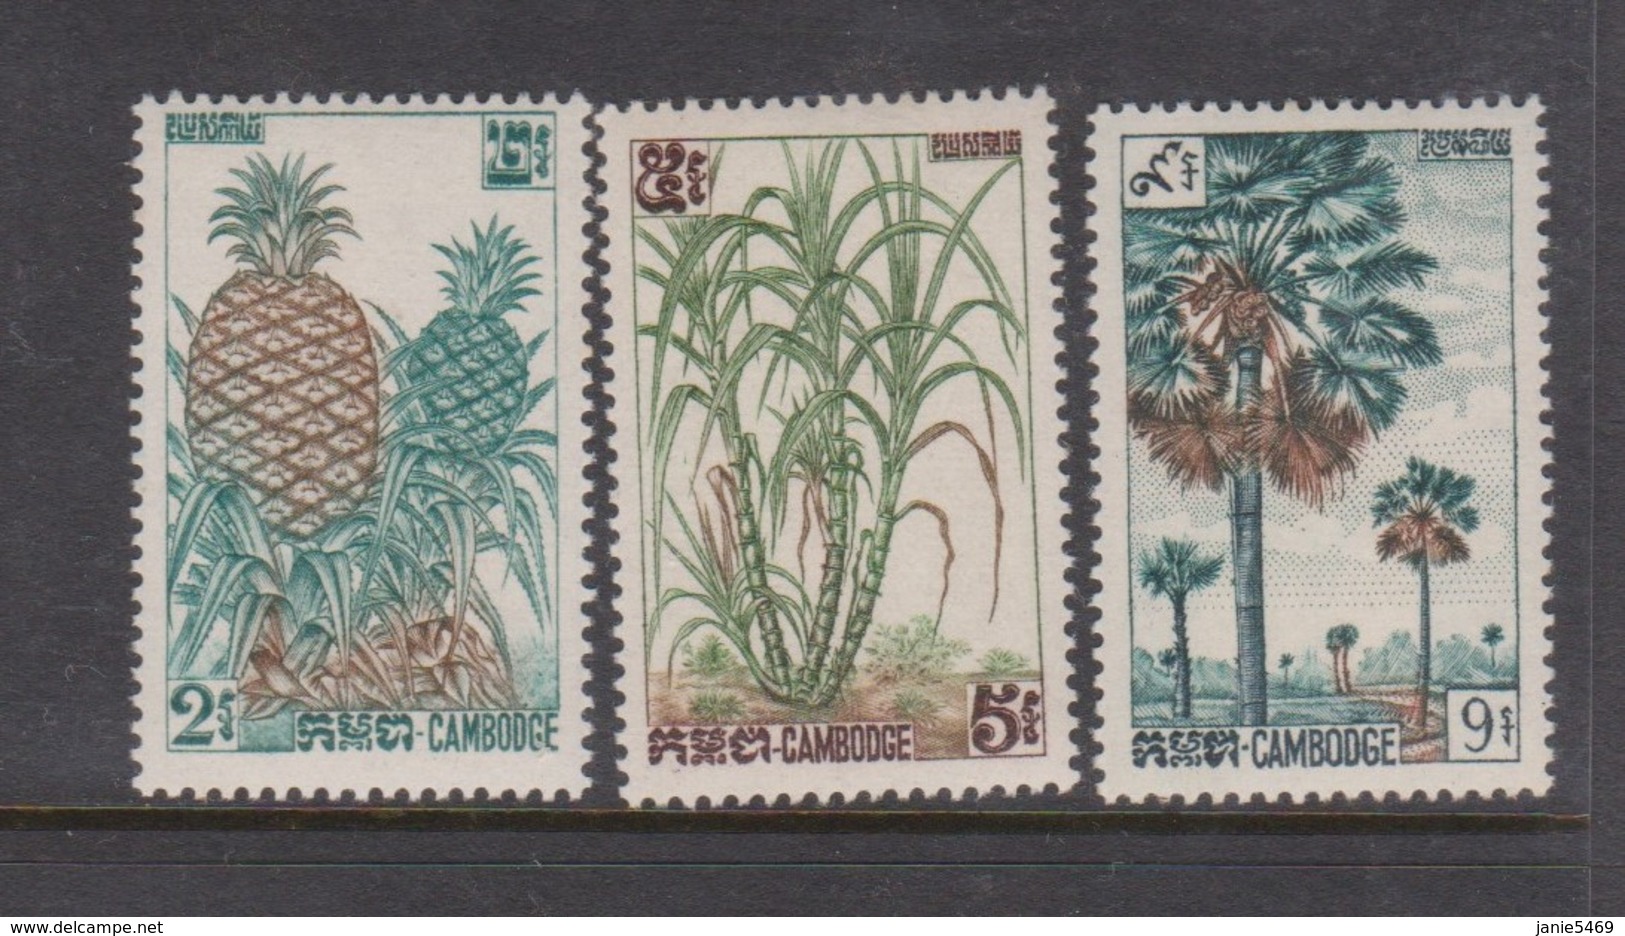 Cambodia SG 139-141 1962 Fruits 2nd Issue ,mint Never Hinged - Cambodja